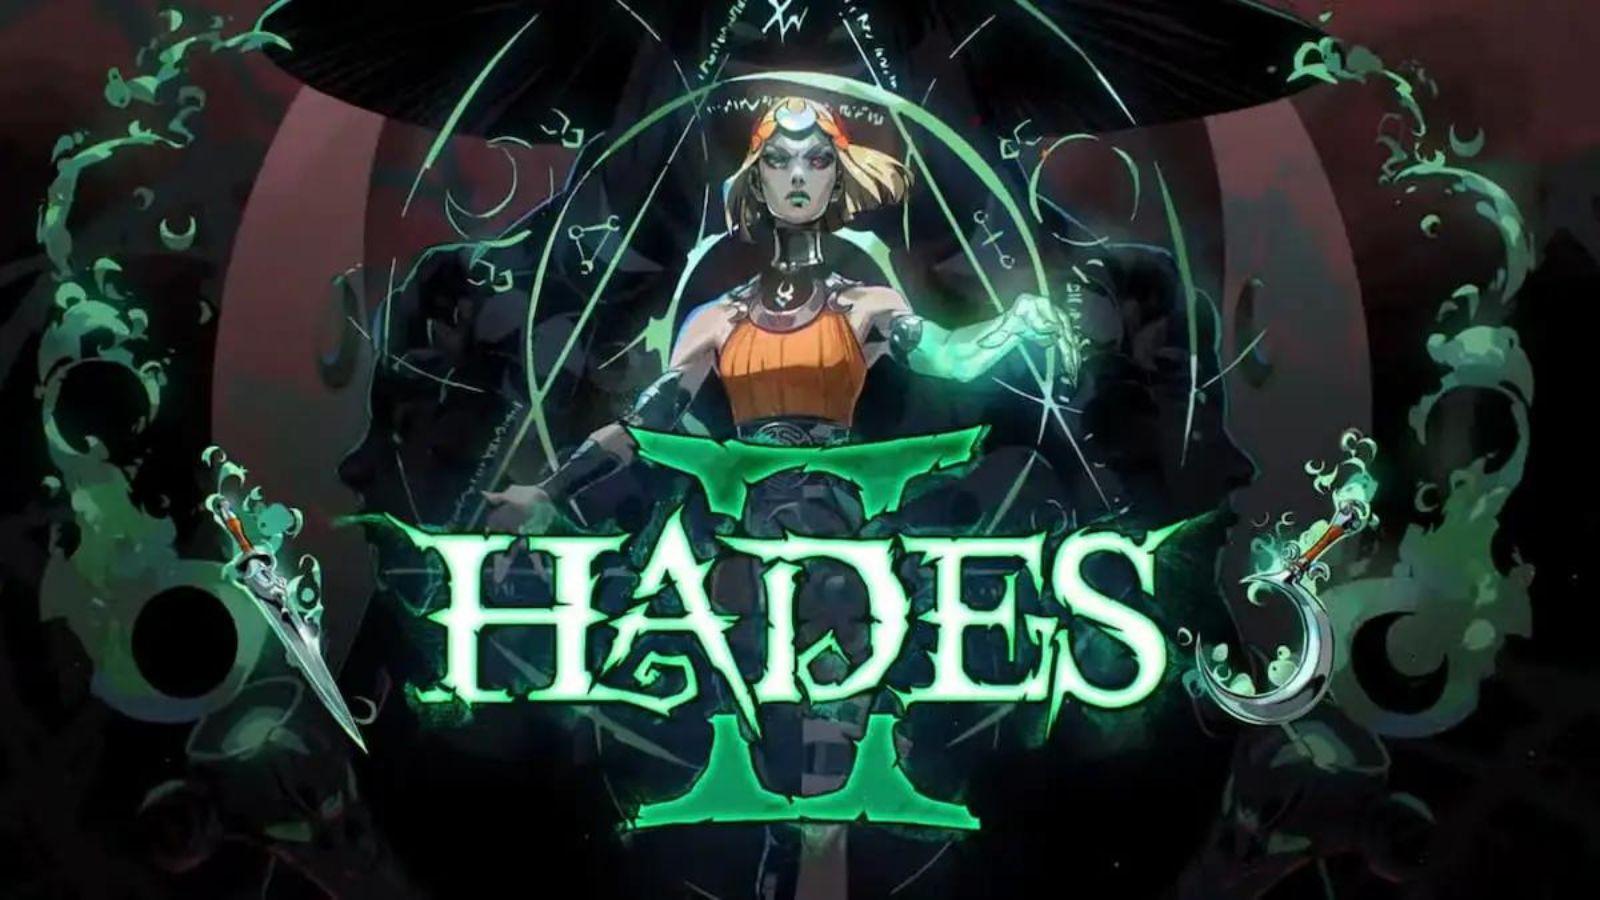 Hades Pre Installed  PC Full Game  Free Download - Extra PC Games